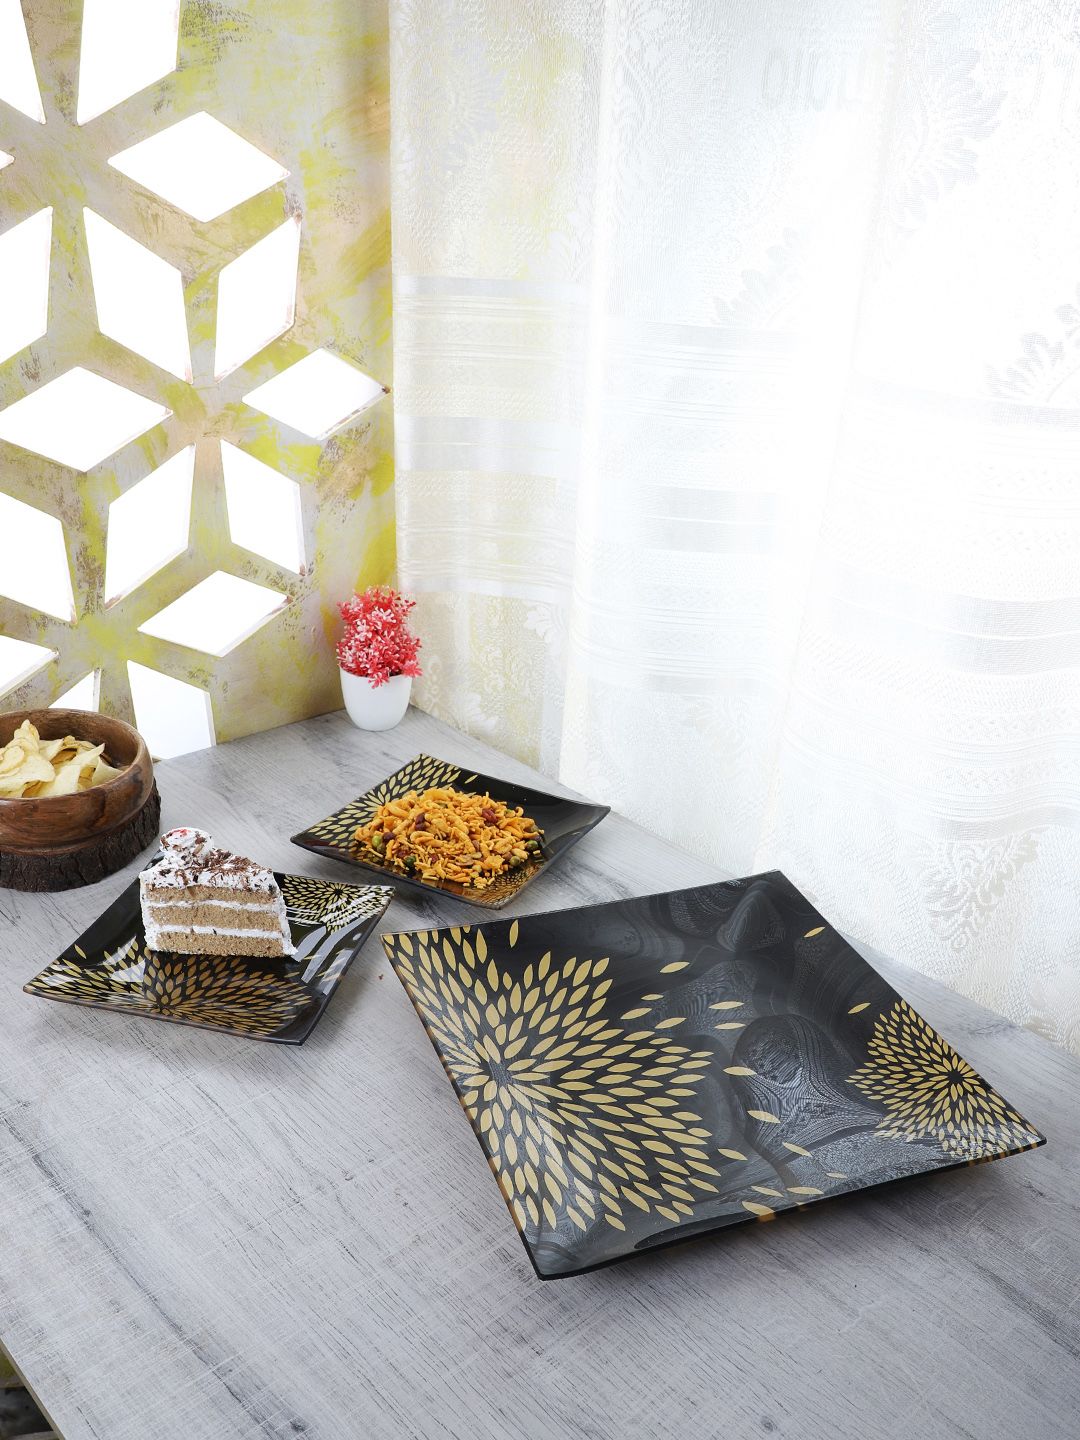 ceradeco Set Of 7 Black & Gold-Toned Printed Small Plates With Serving Plate Price in India